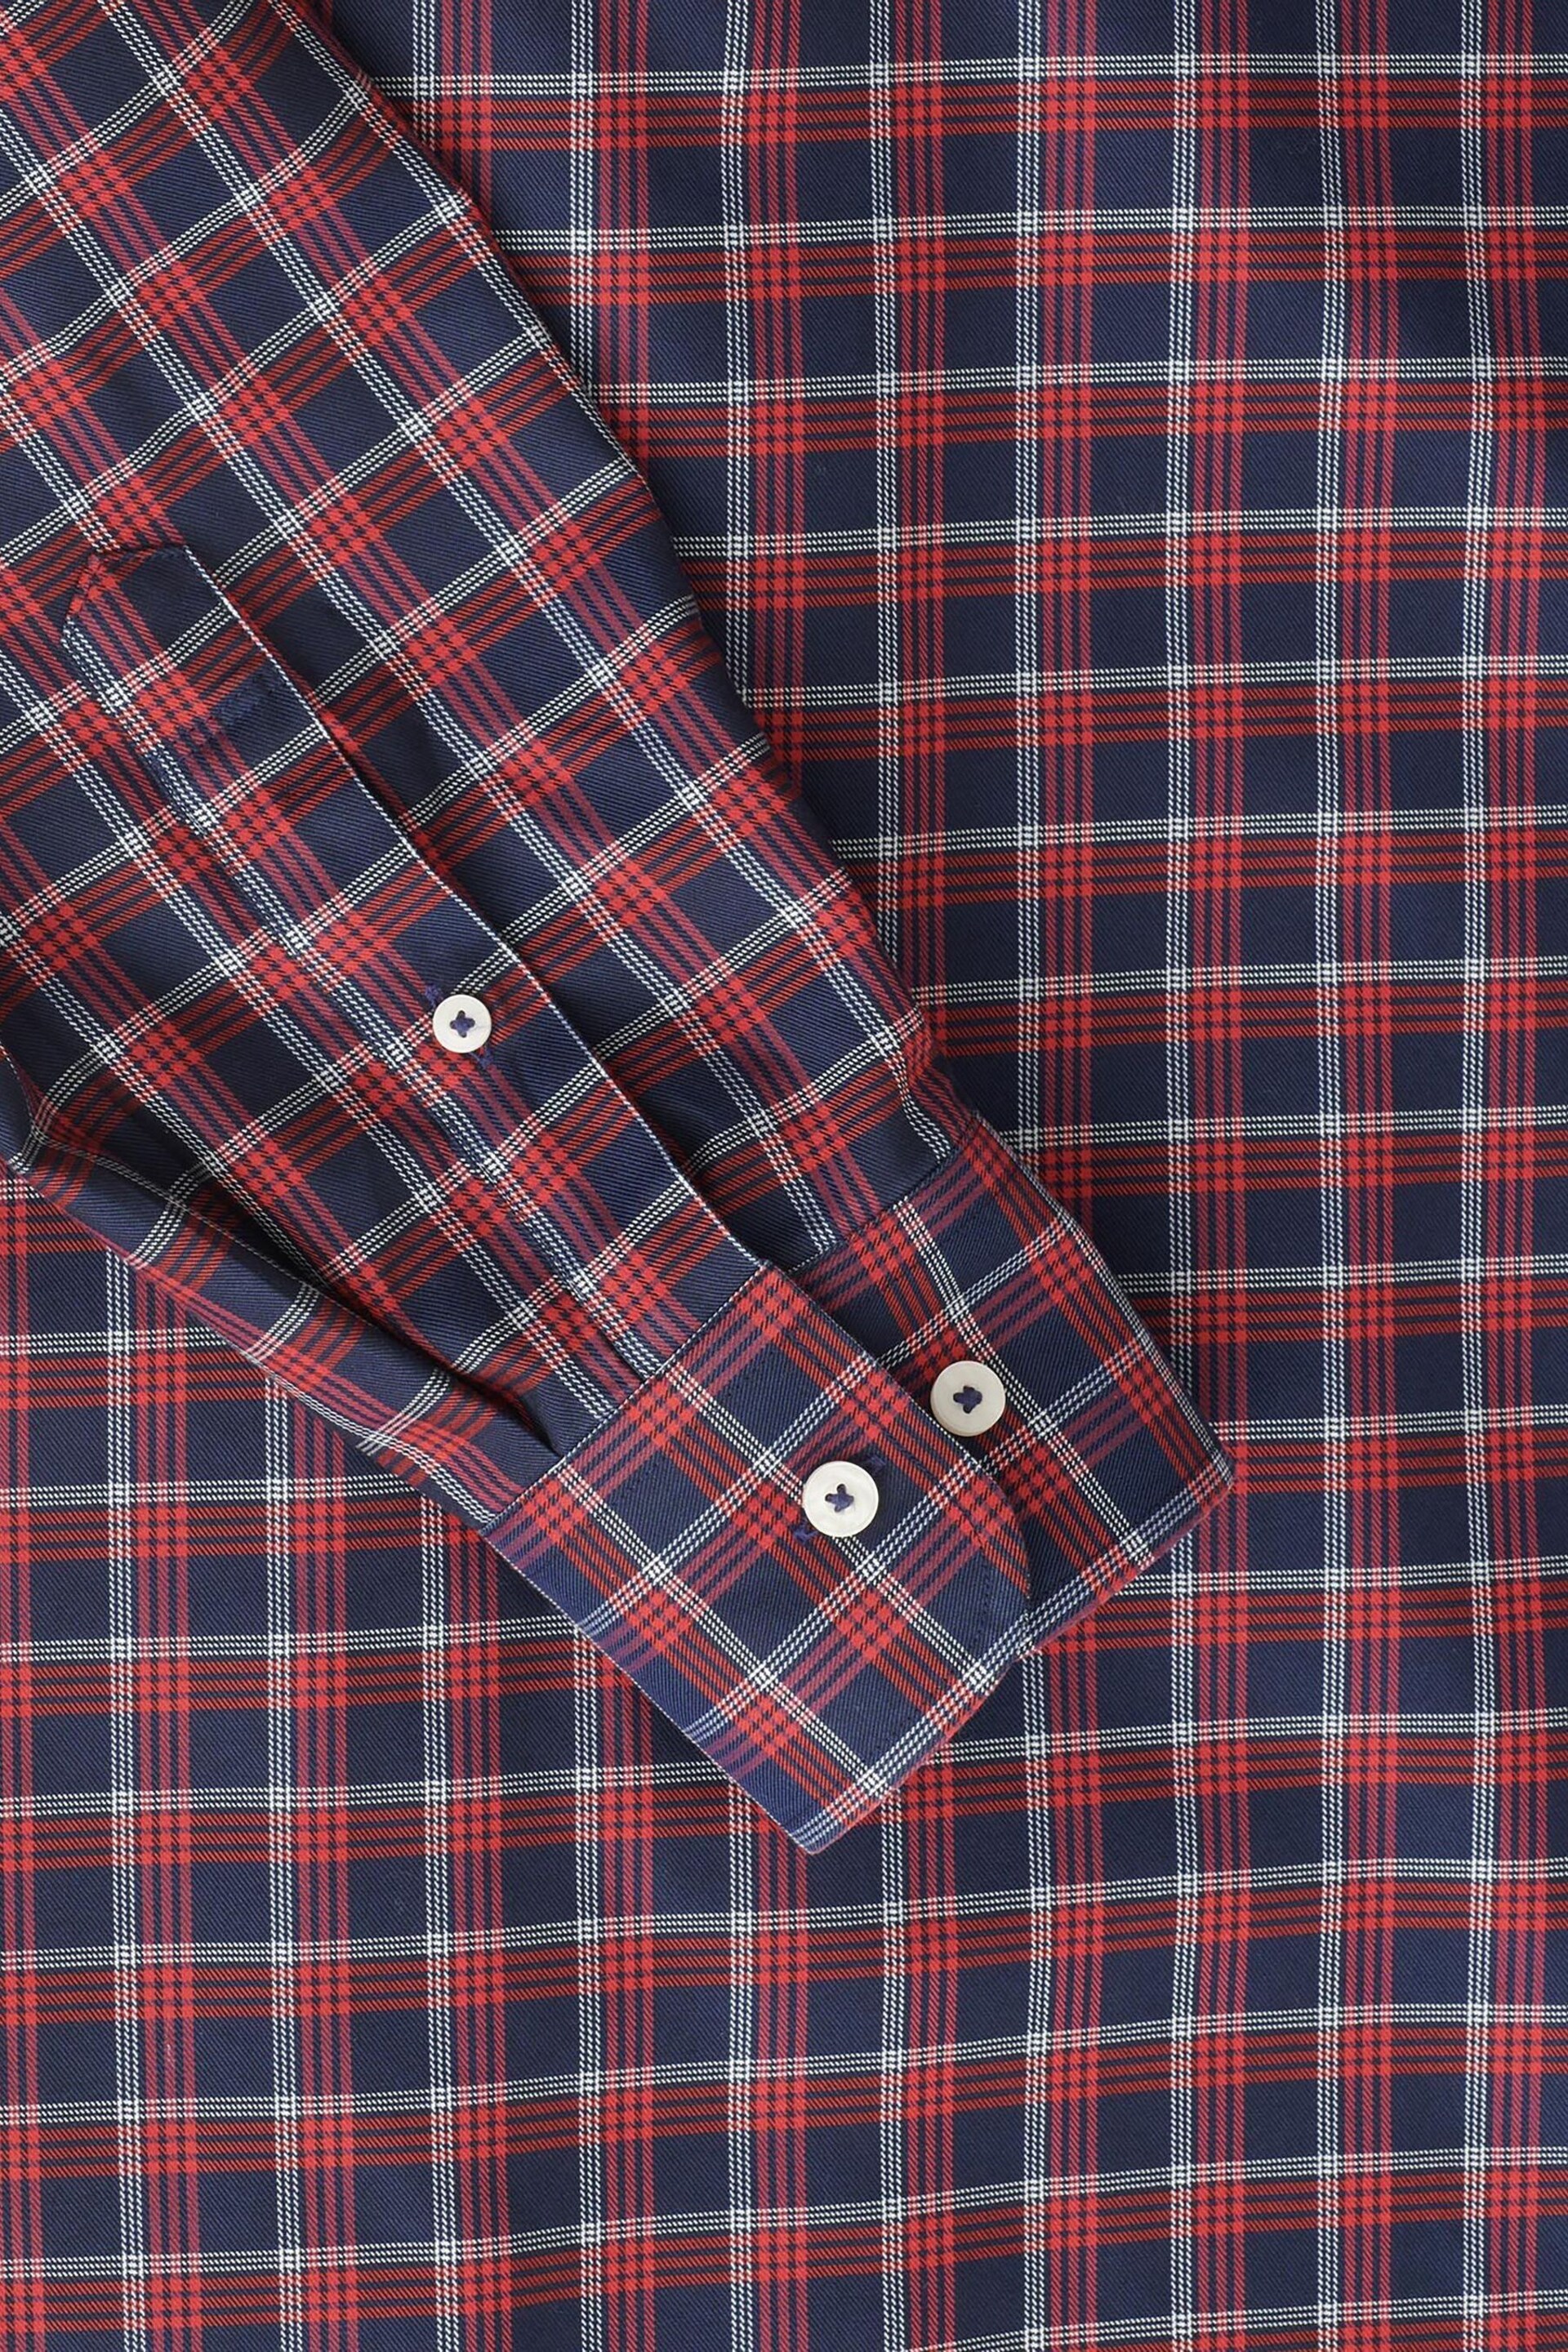 UNTUCKit Blue/Red Wrinkle-Free Slim Fit Cheny Shirt - Image 6 of 6